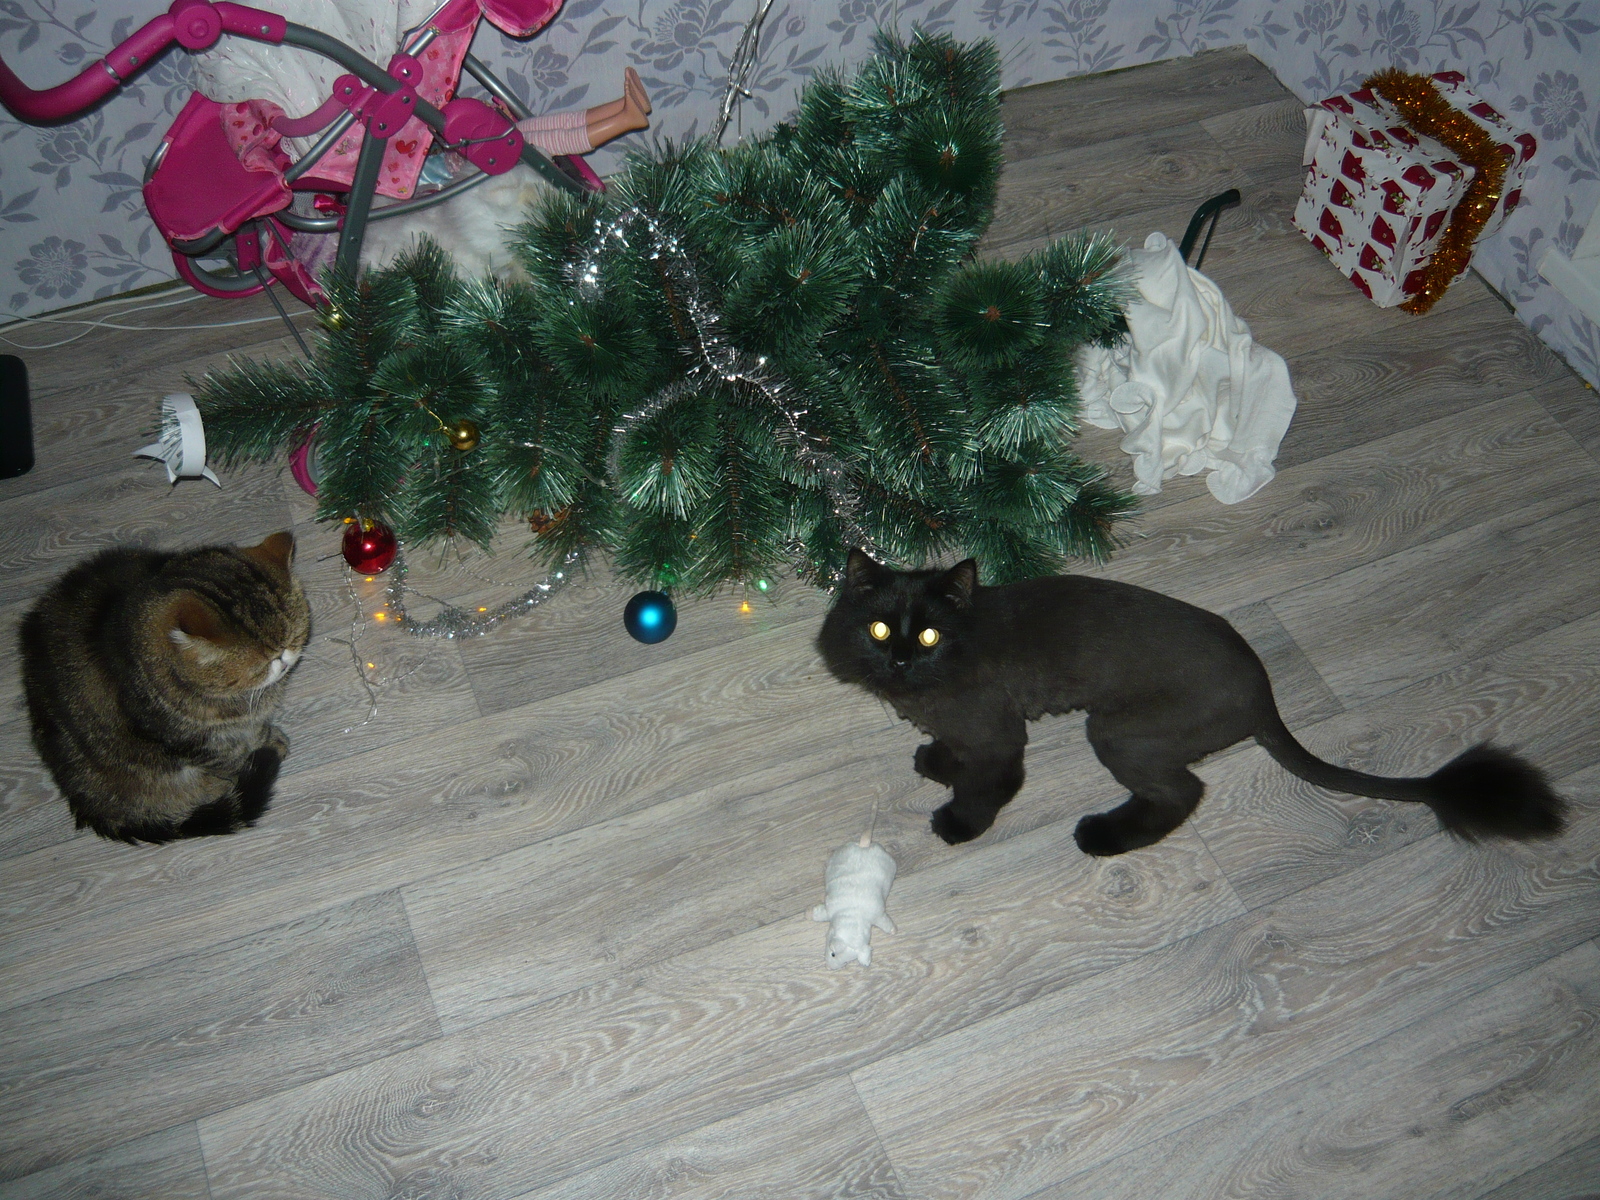 Season is open - My, cat, New Year, Christmas trees